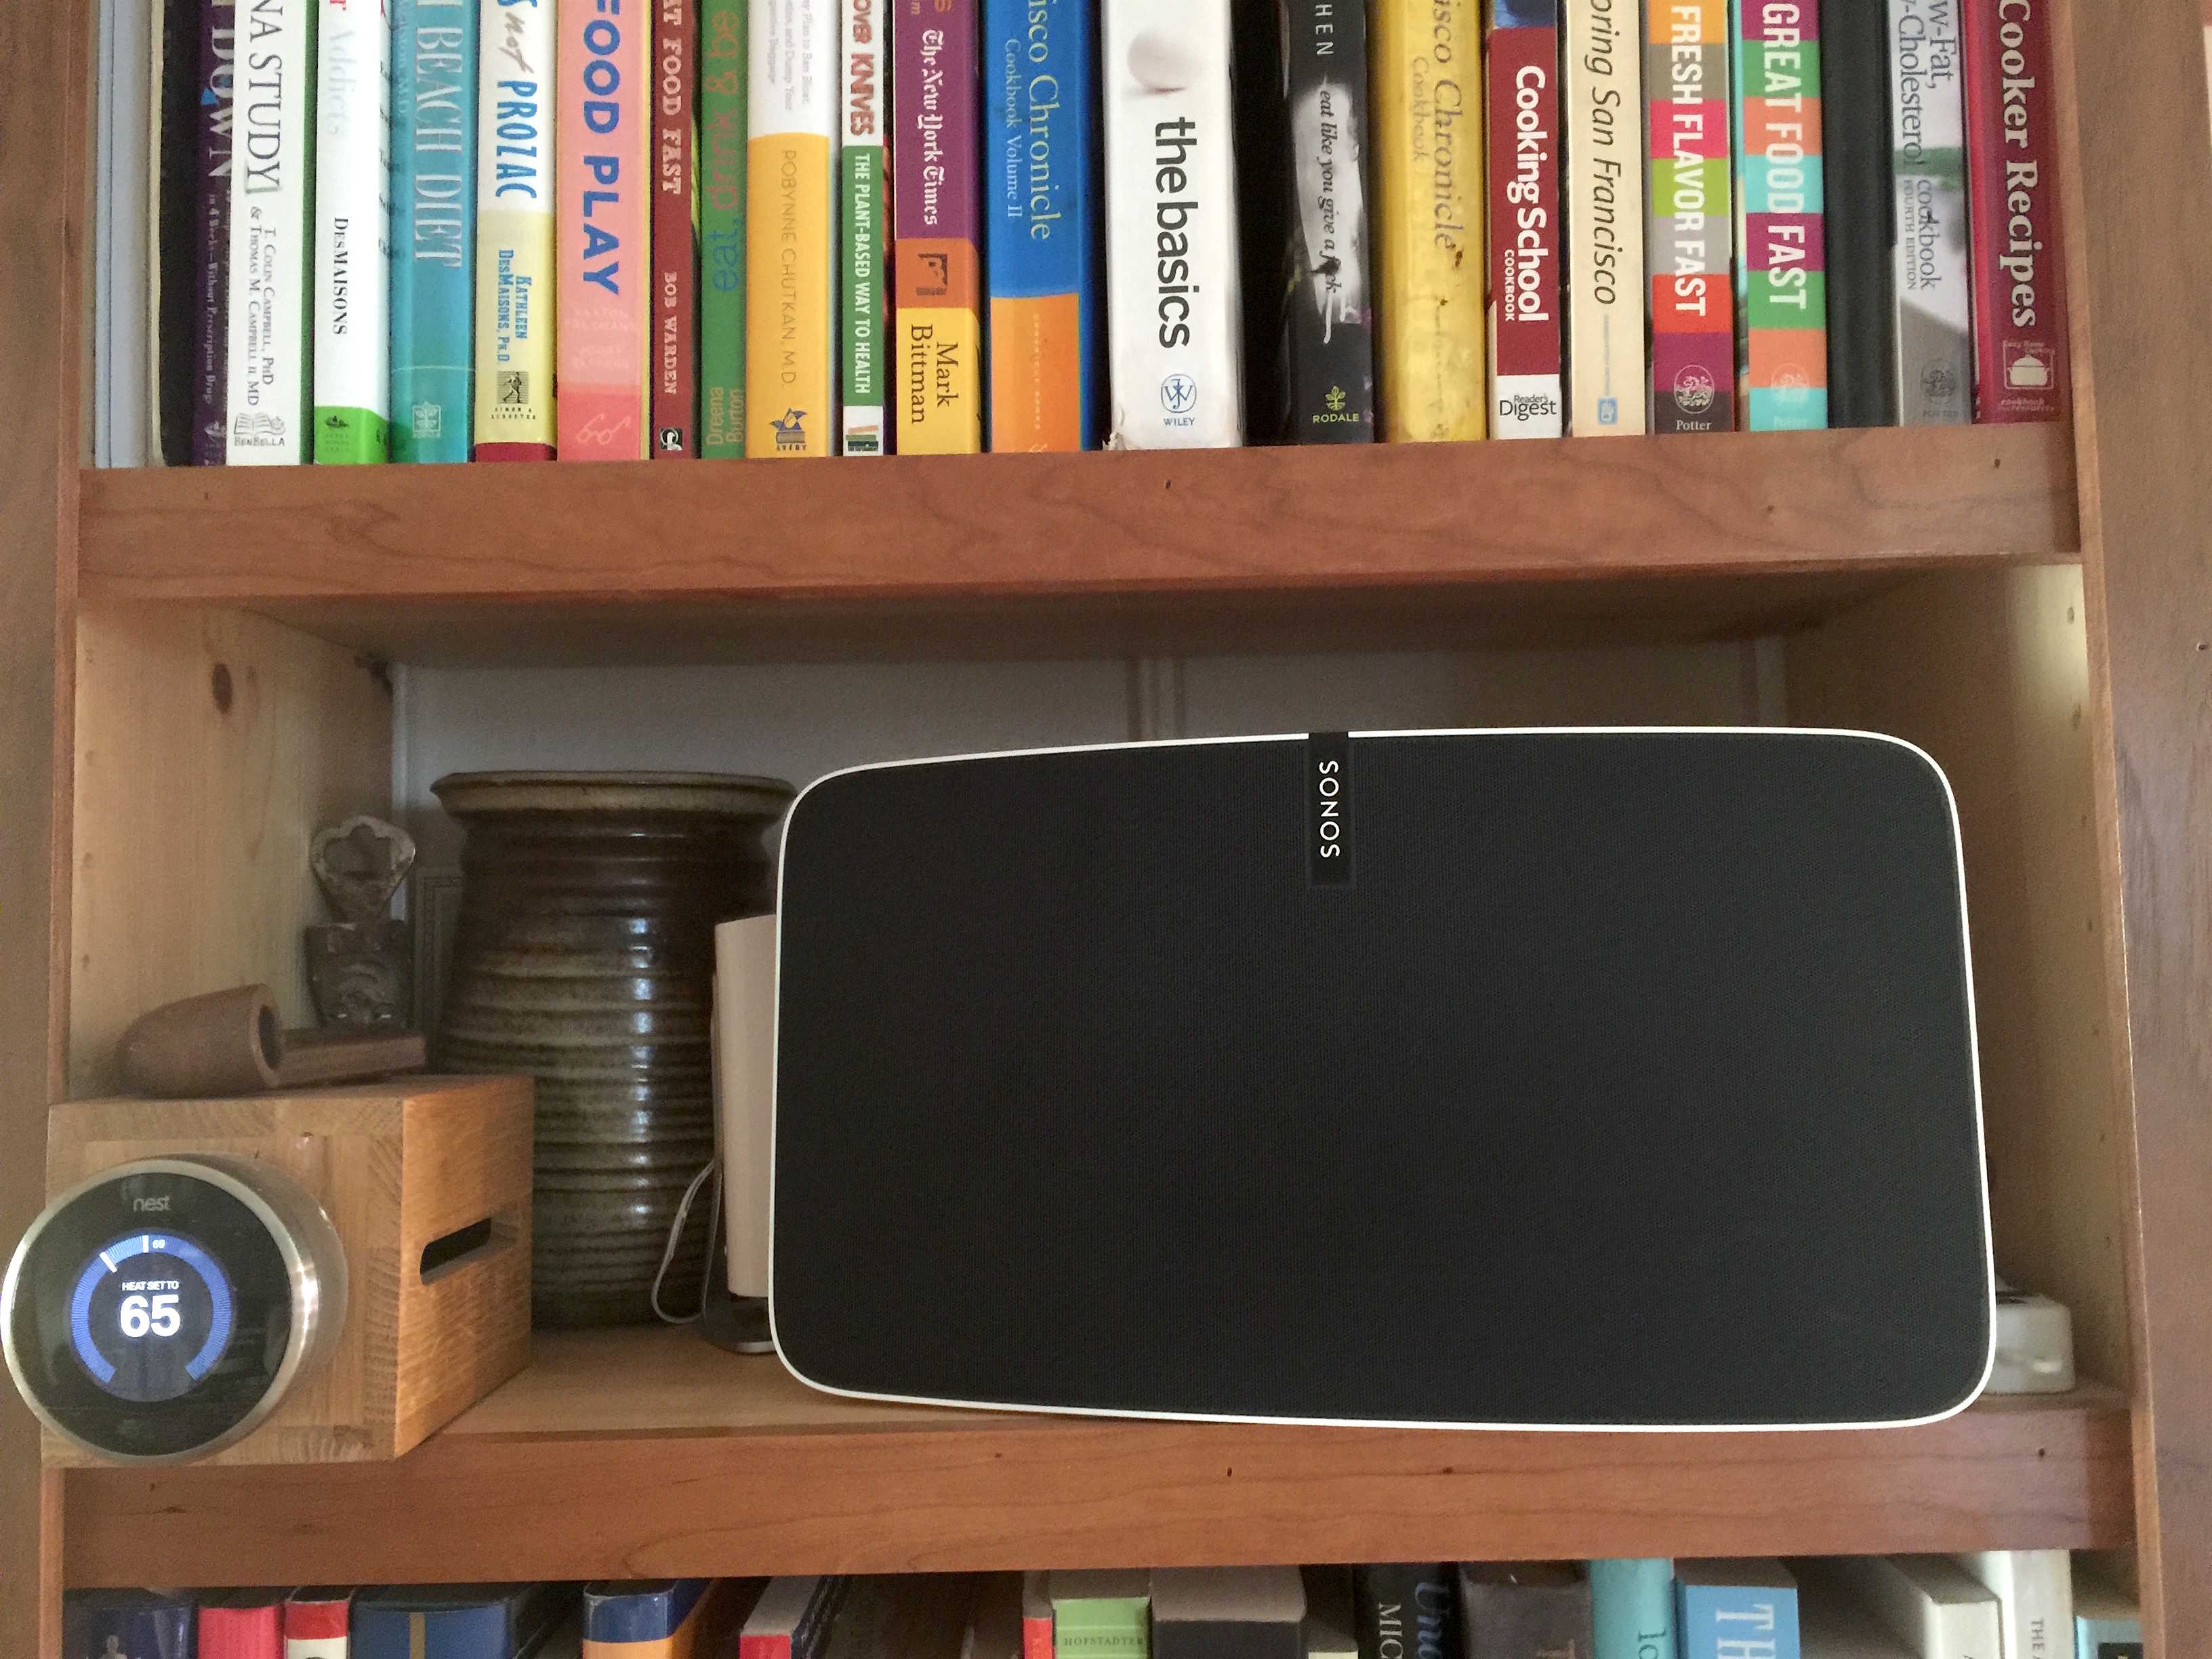 The new Play:5 speaker is a great update to Sonos' top-of-the-line box.